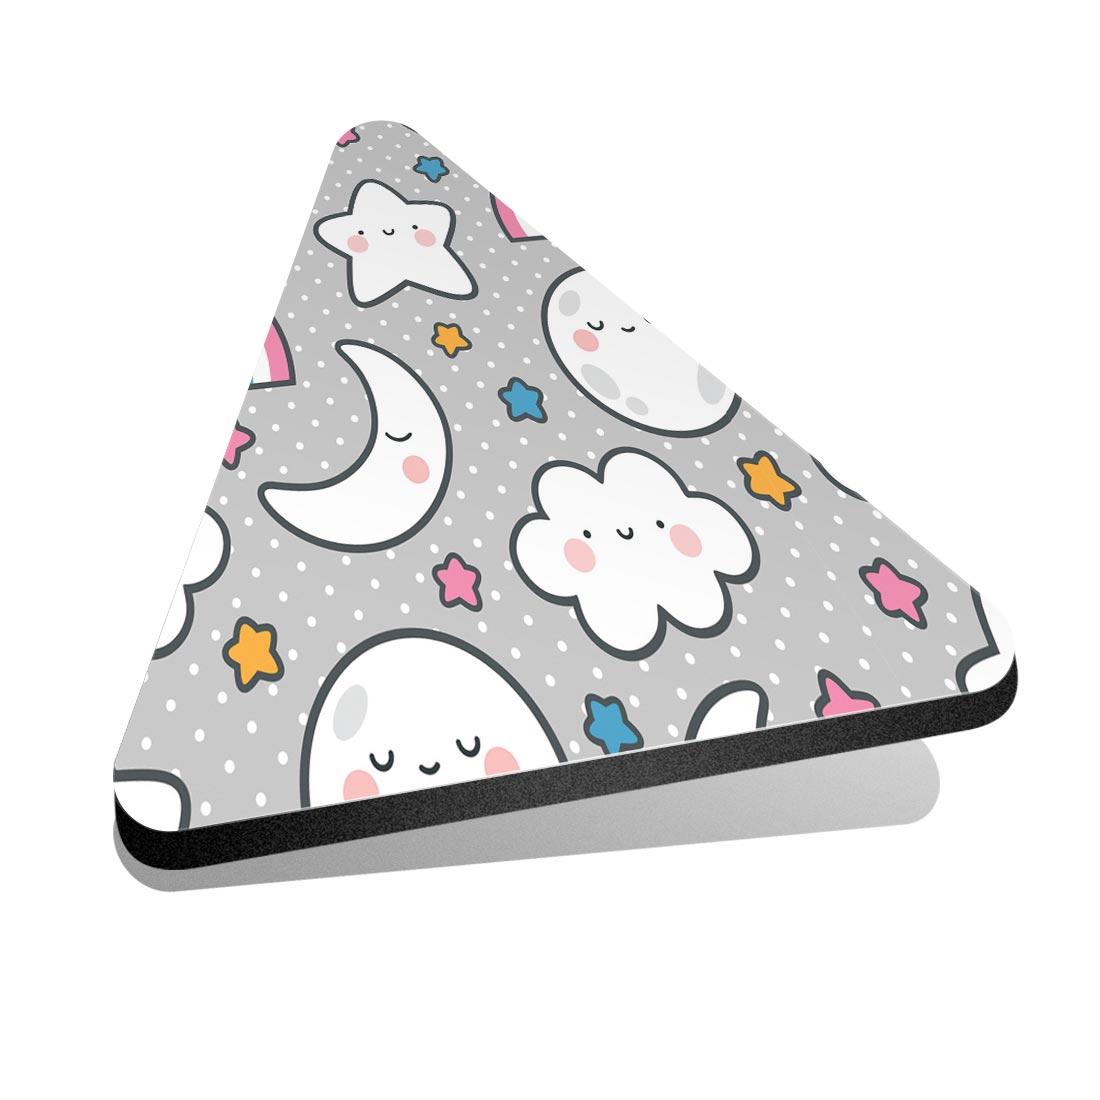 1x Triangle Fridge MDF Magnet Moon Clouds Rainbow Kawaii Pattern #170170 - Picture 1 of 1